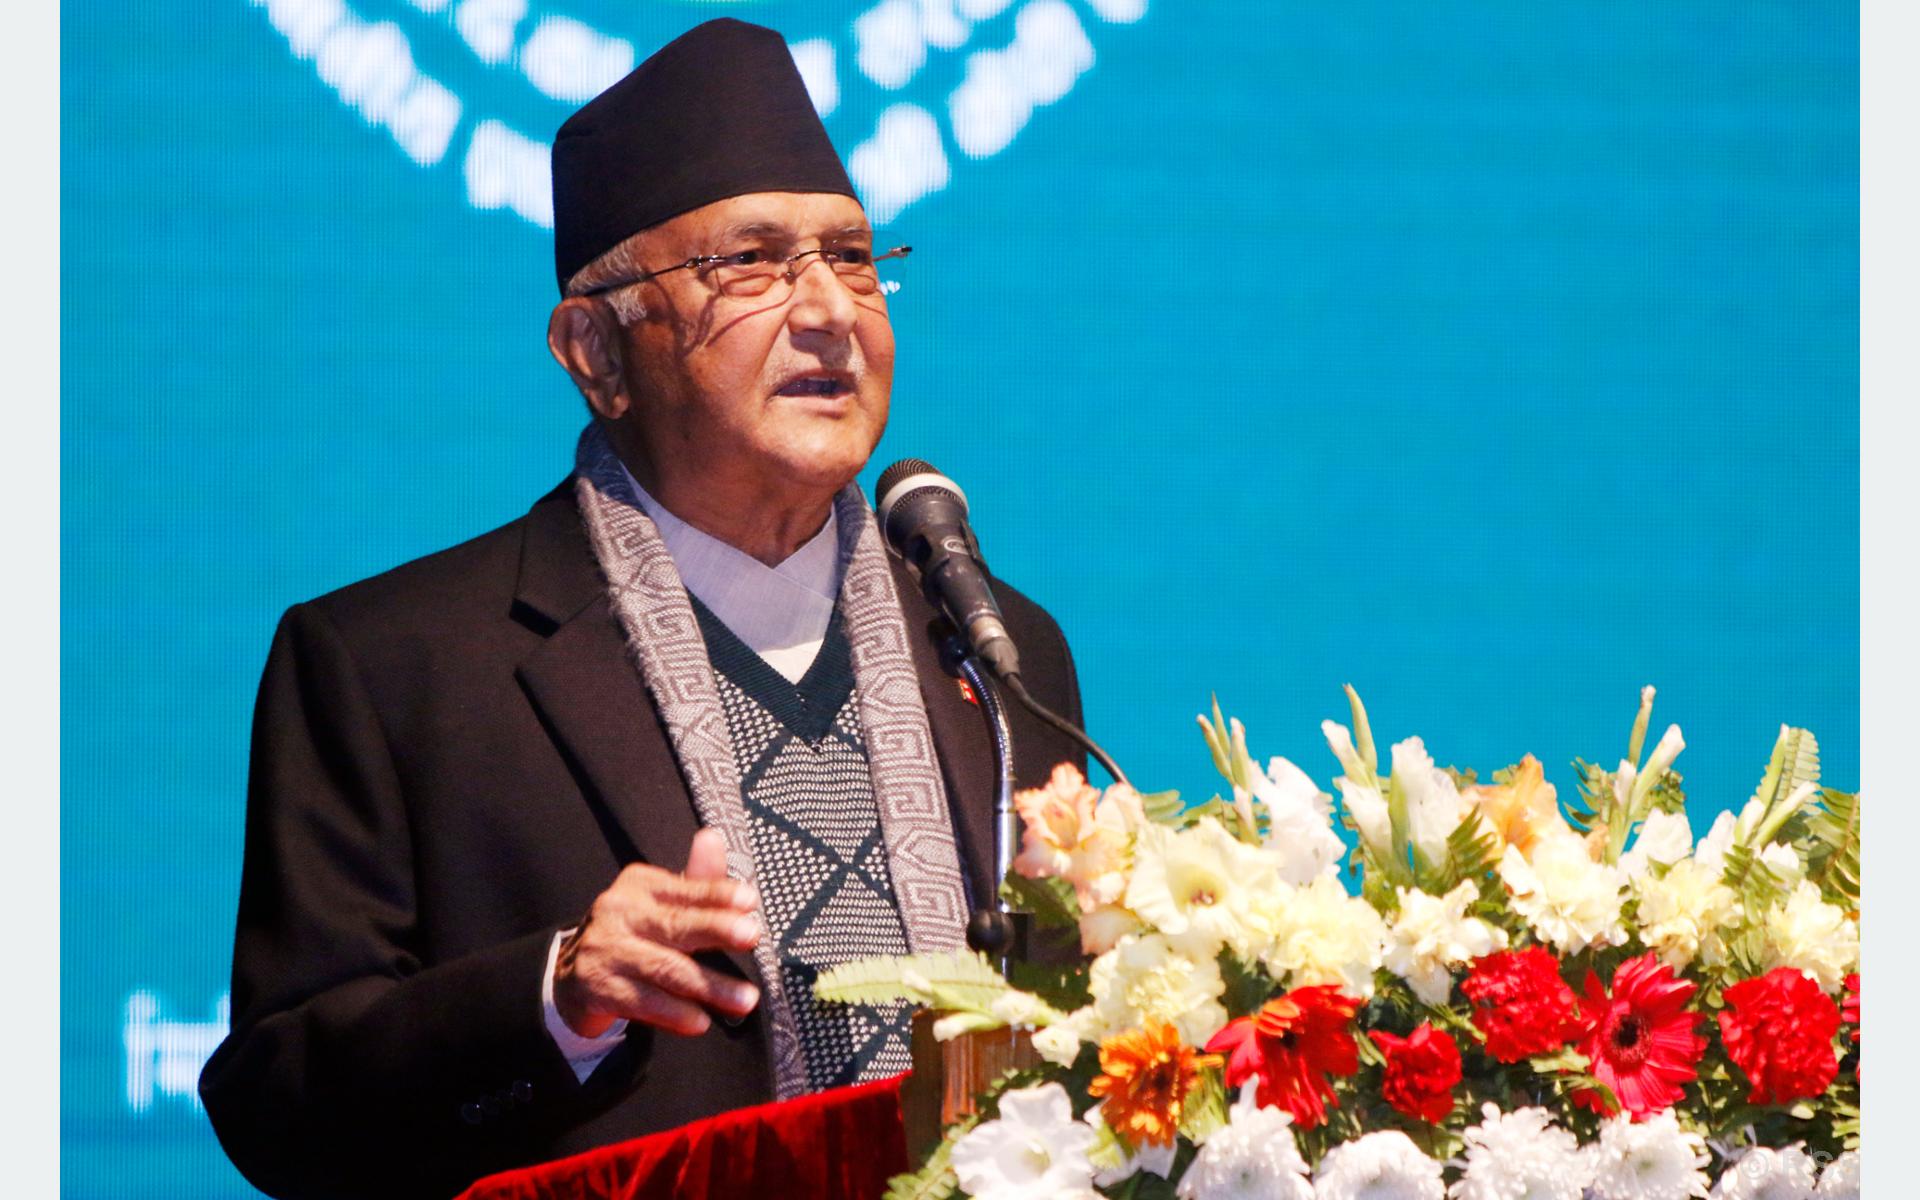 PM Oli visiting Kanchanpur today, security beefed up